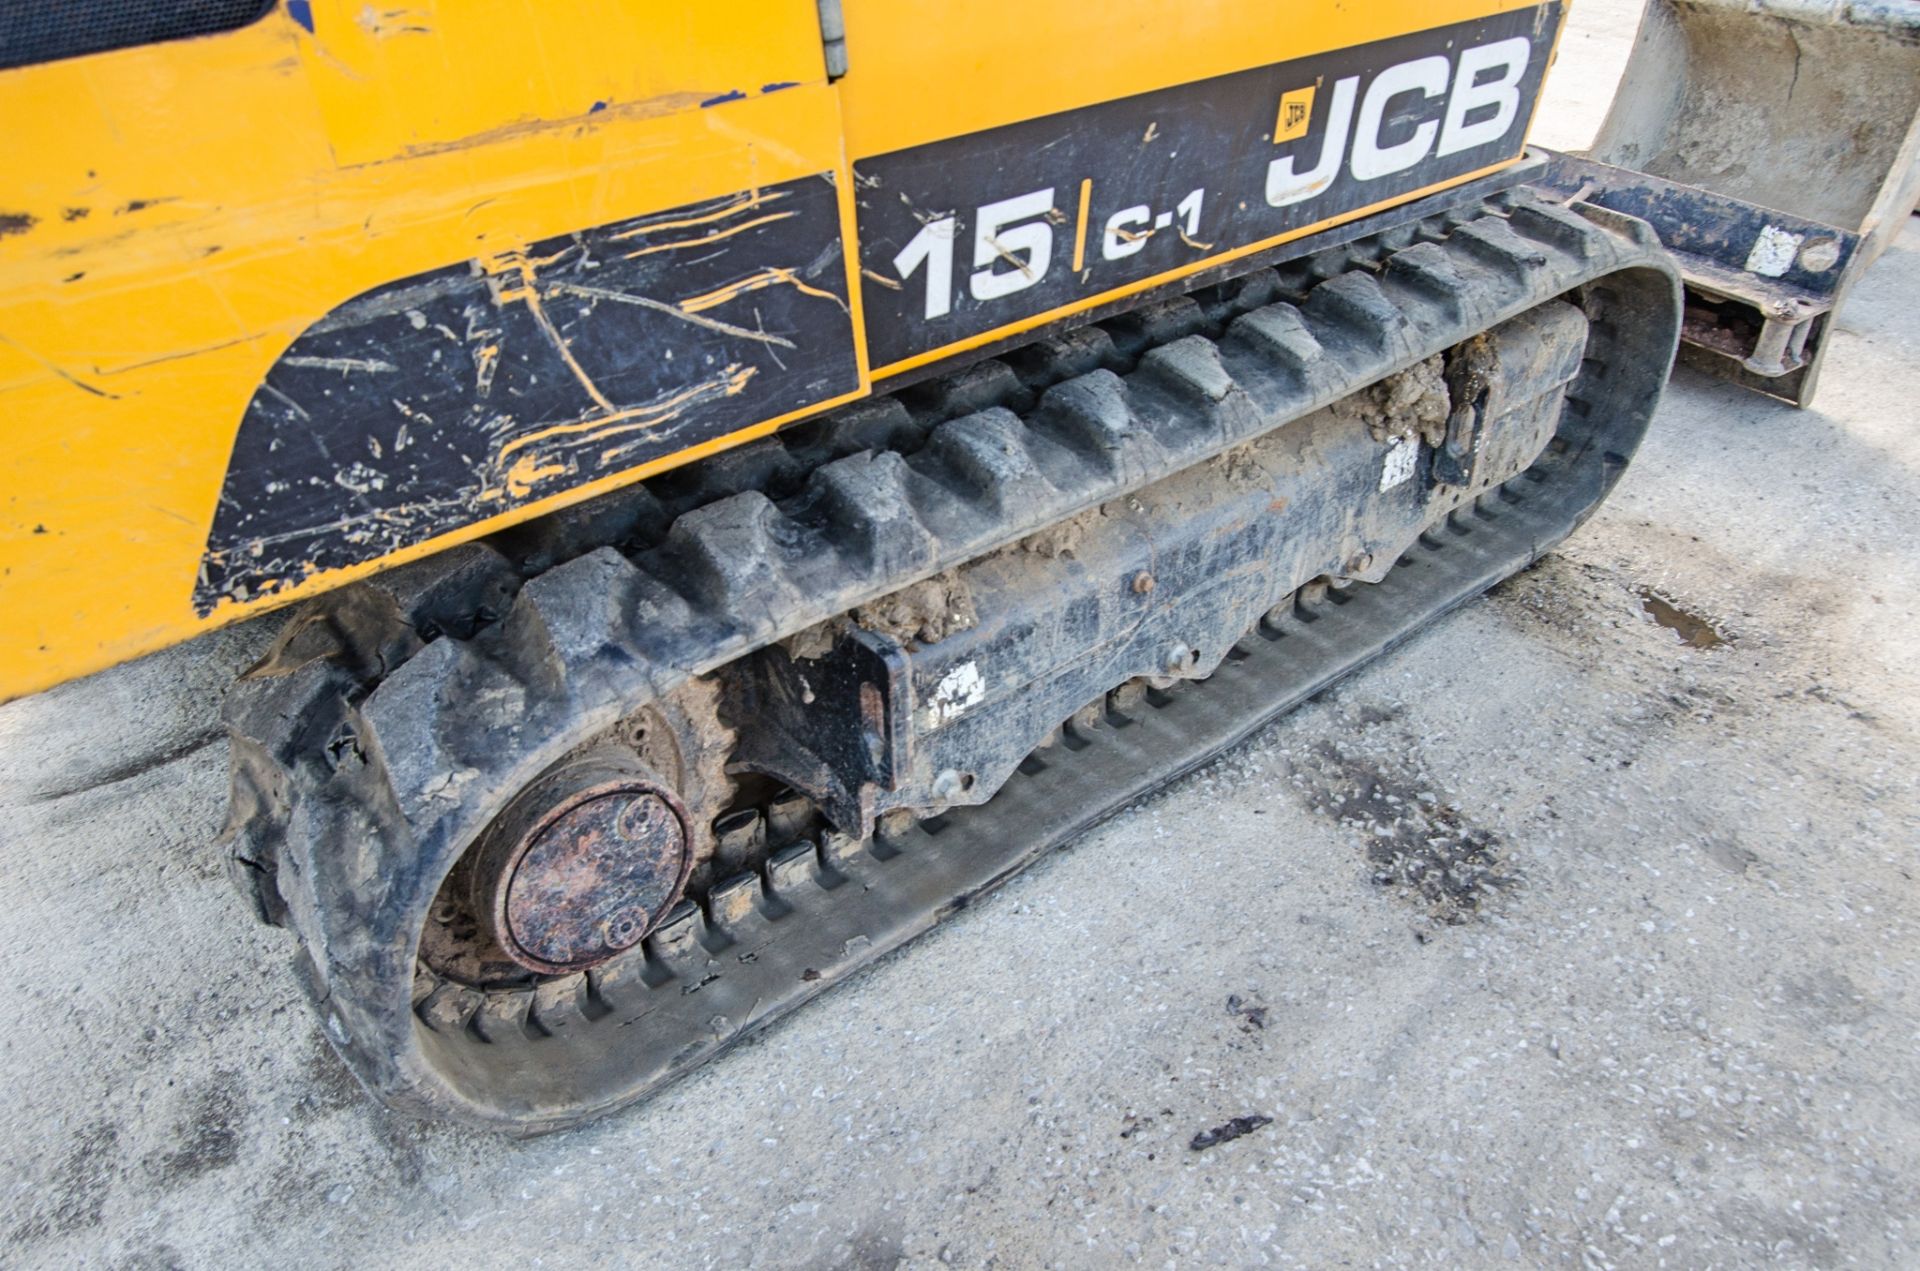 JCB 15 C-1 1.5 tonne rubber tracked mini excavator Year: 2019 S/N: 2710370 Recorded Hours: 783 - Image 9 of 24